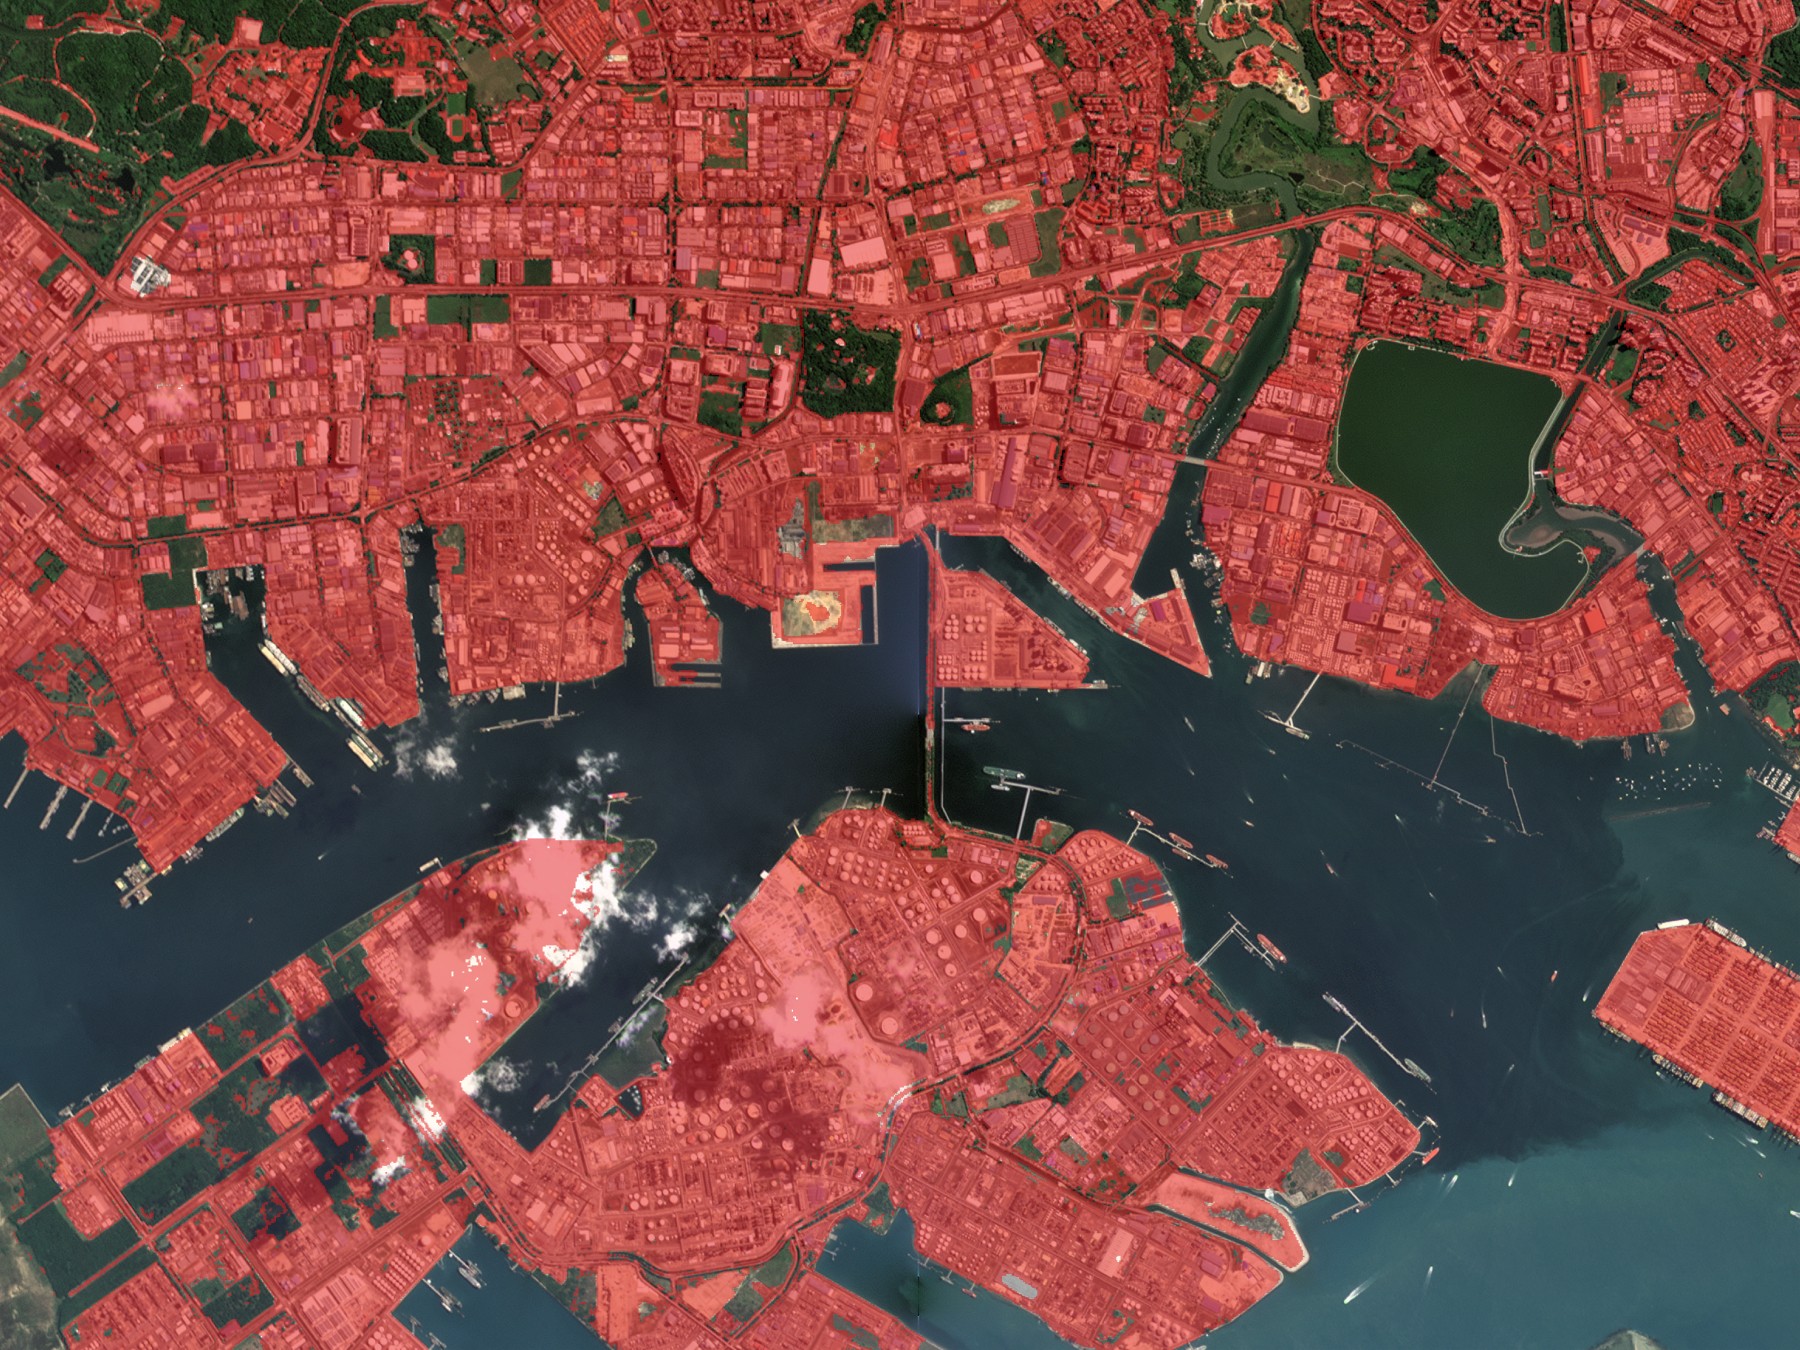 IO impervious surface map of Singapore